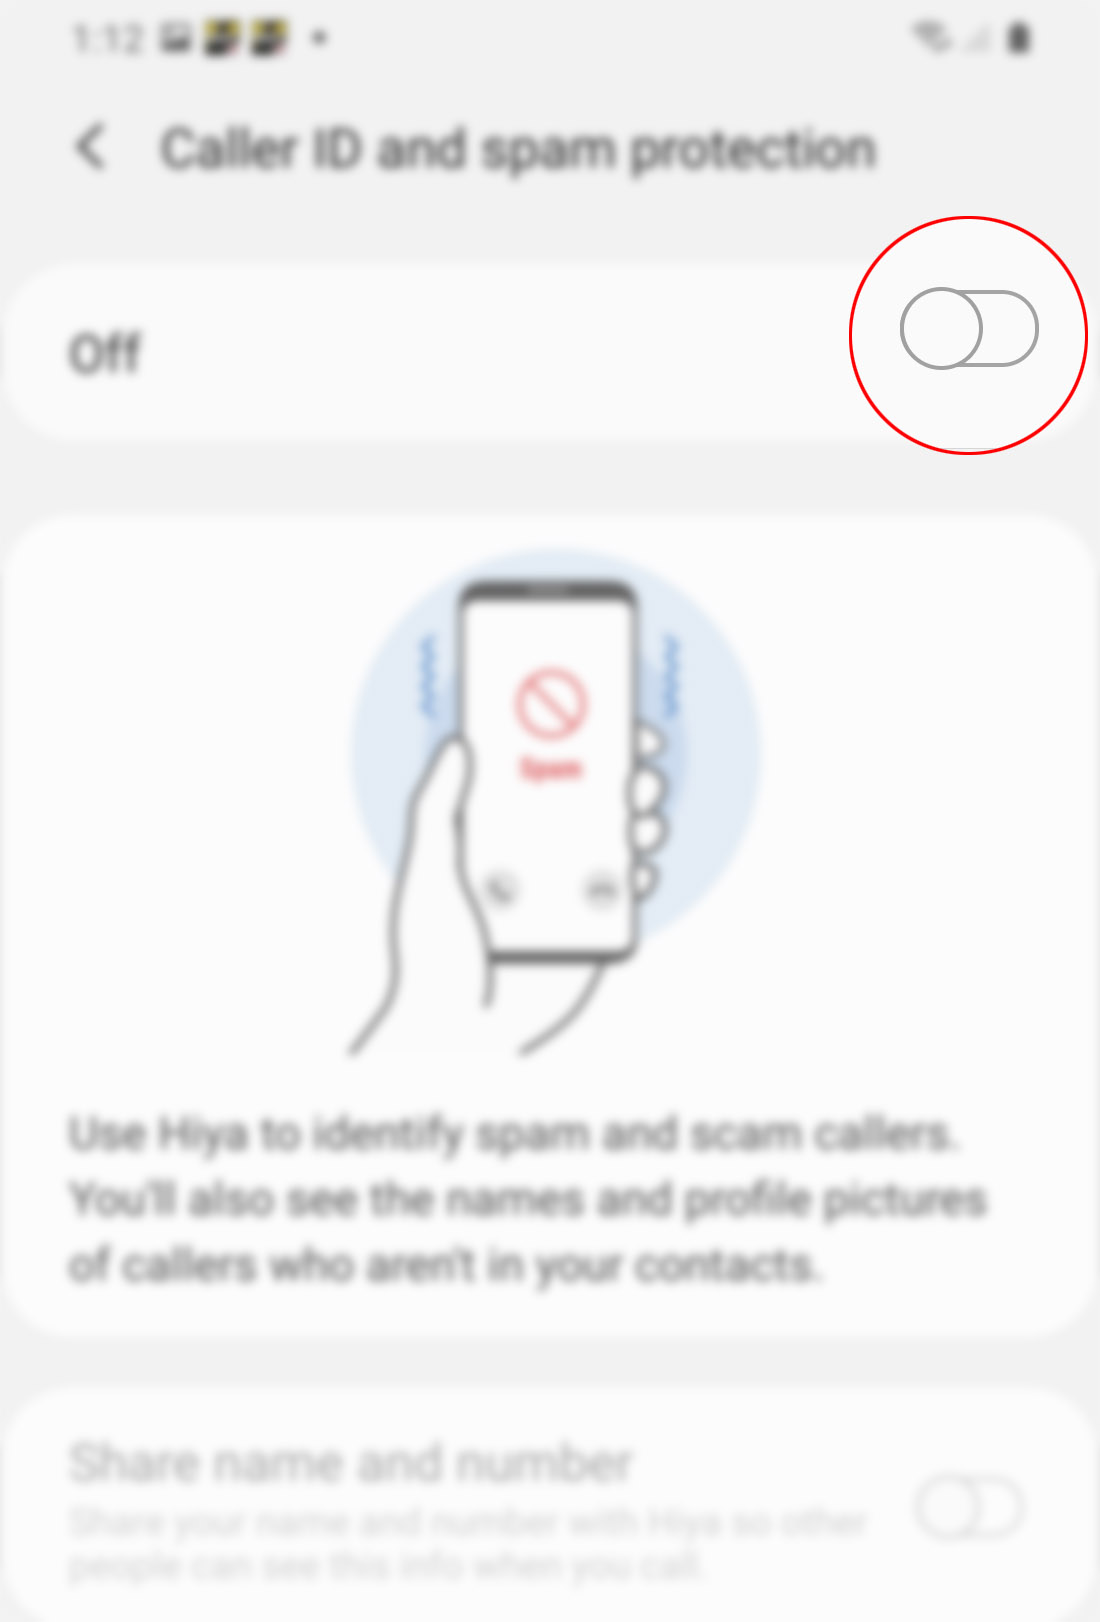 identify spam and scam callers on galaxy s20 - turn on caller id and spam protection